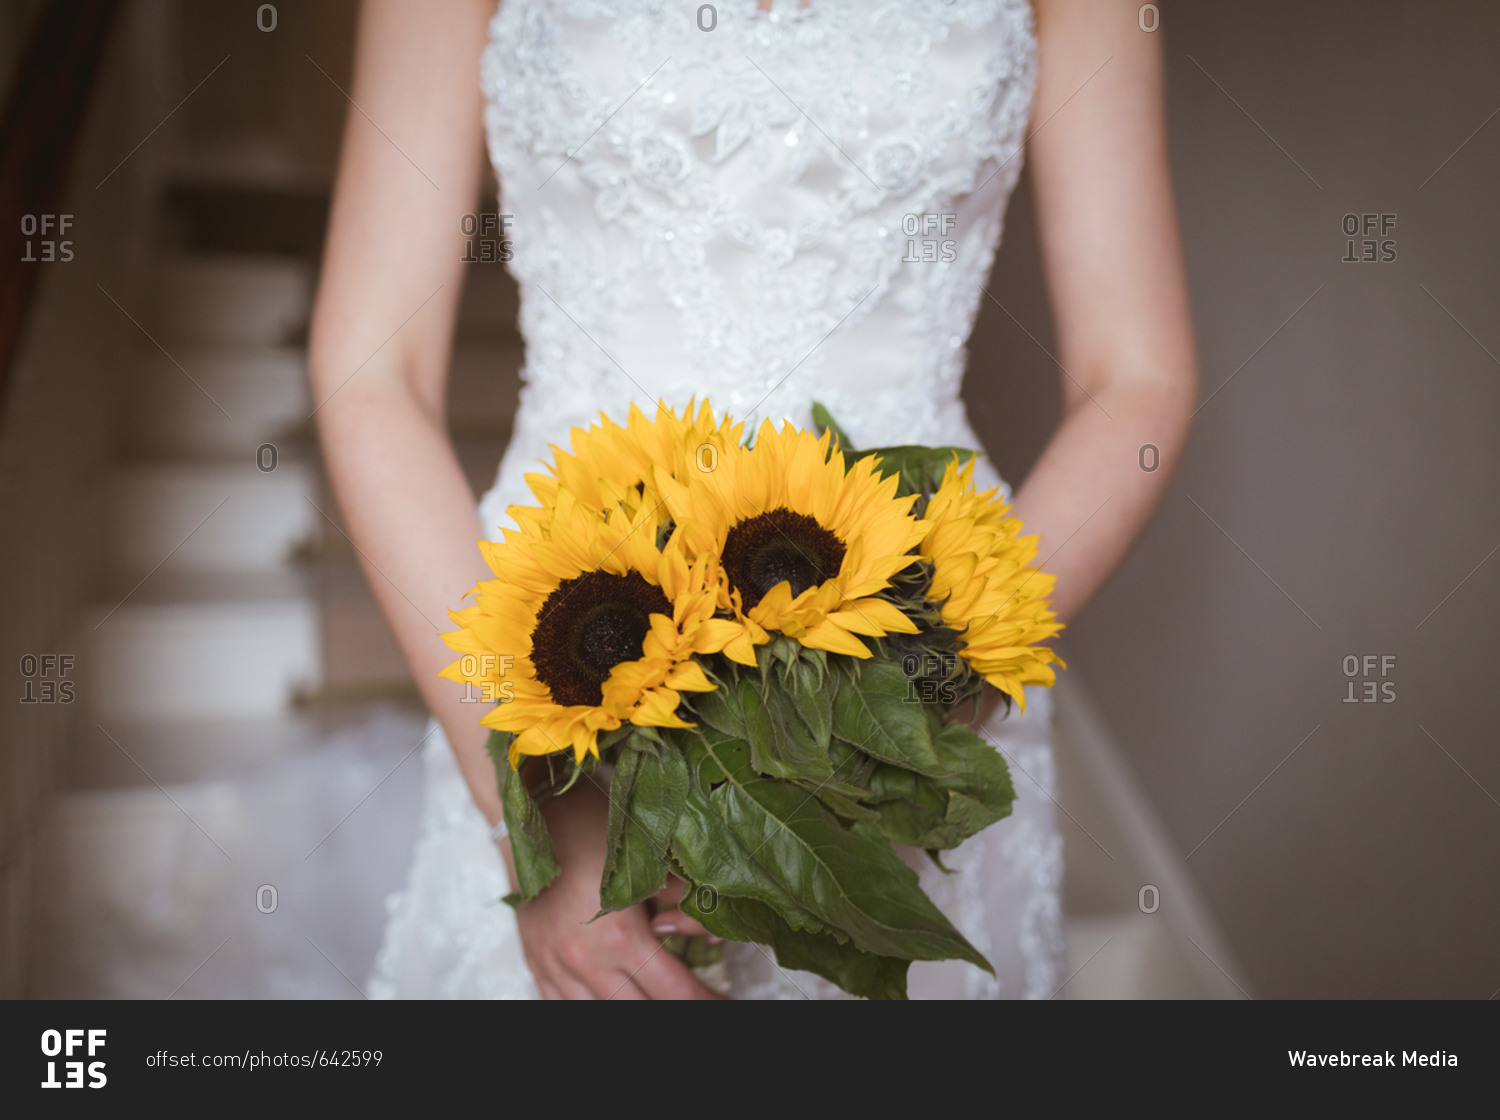 Mid section of bride holding a flower bouquet